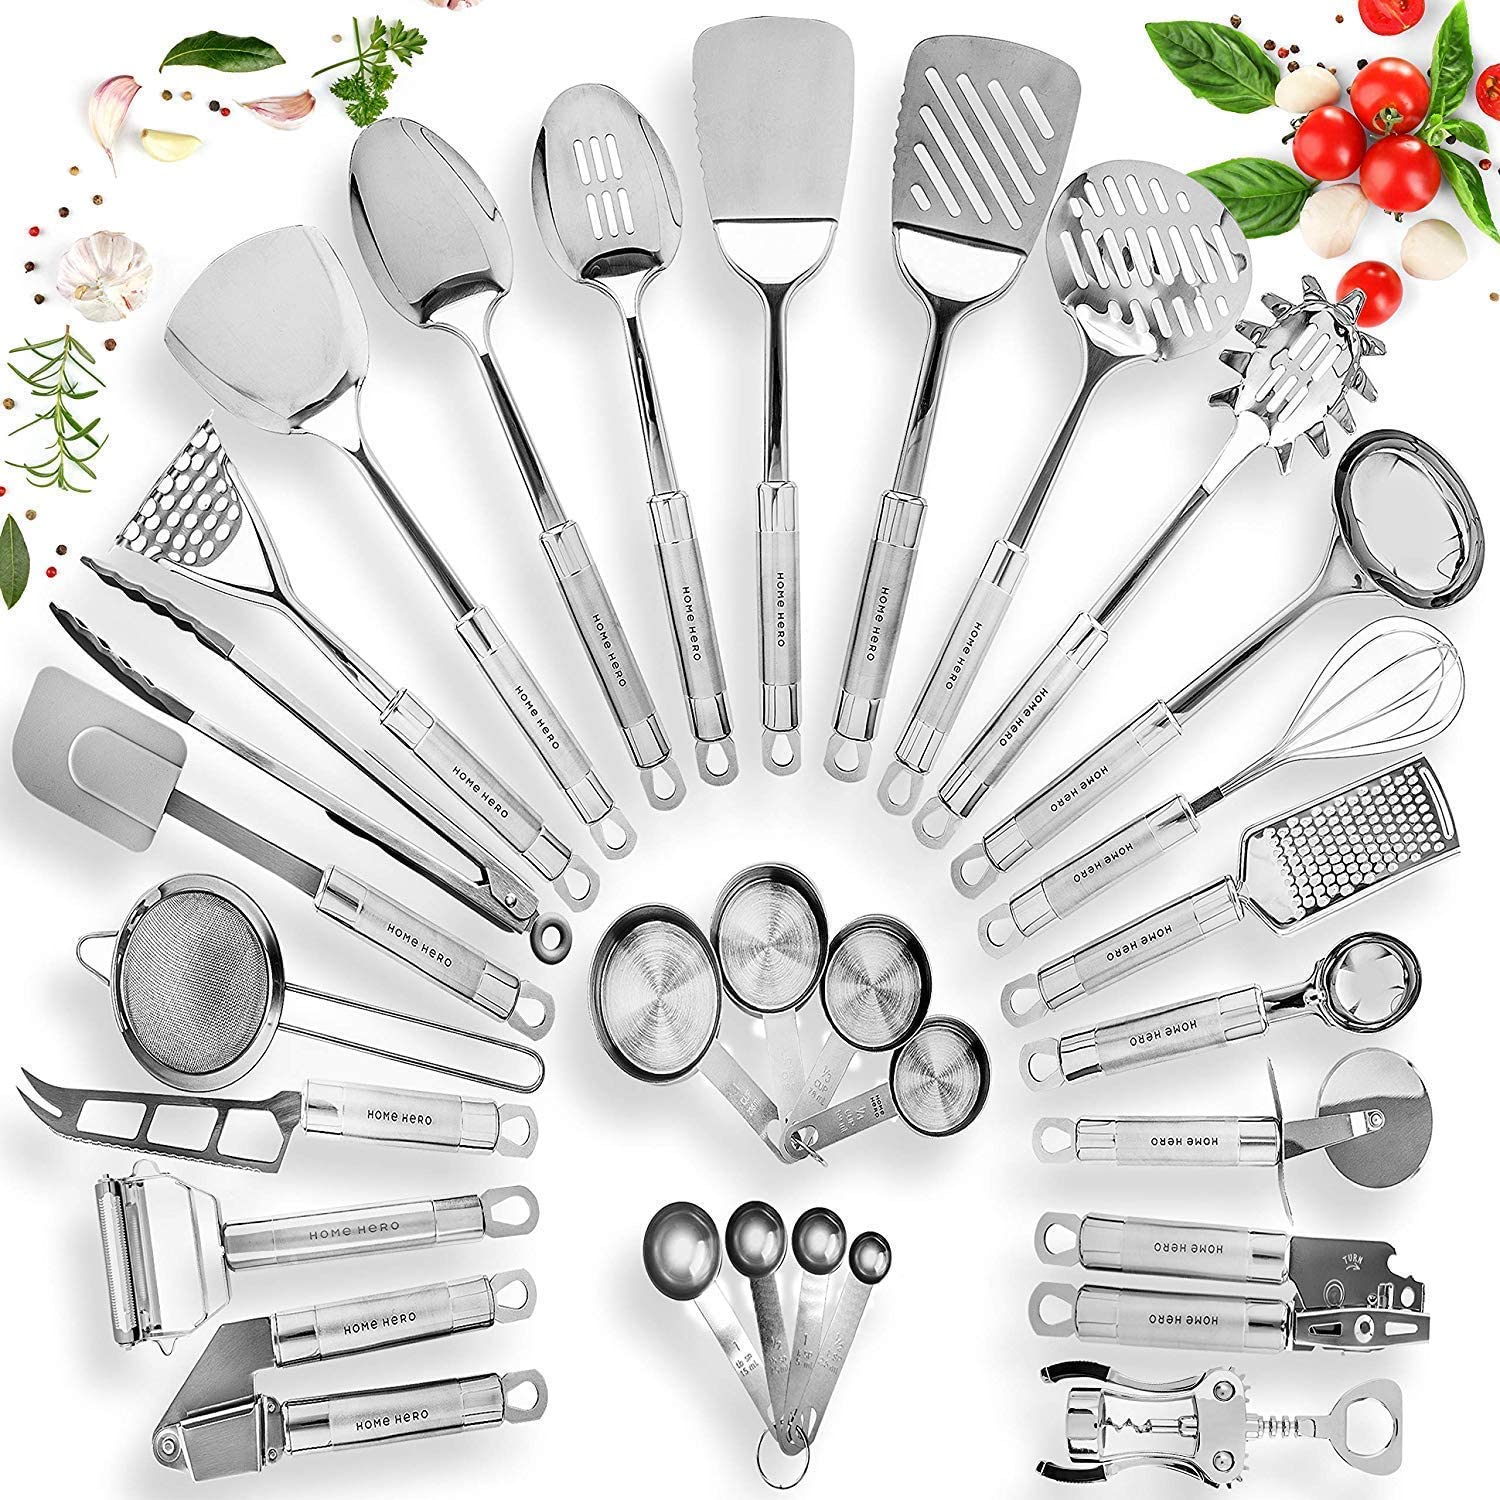 Home Hero 29-pcs Kitchen Utensils Set - Stainless Steel Cooking Utensils Set with Spatula - Kitchen Gadgets &amp; Kitchen Tool Gift Set - image 1 of 7